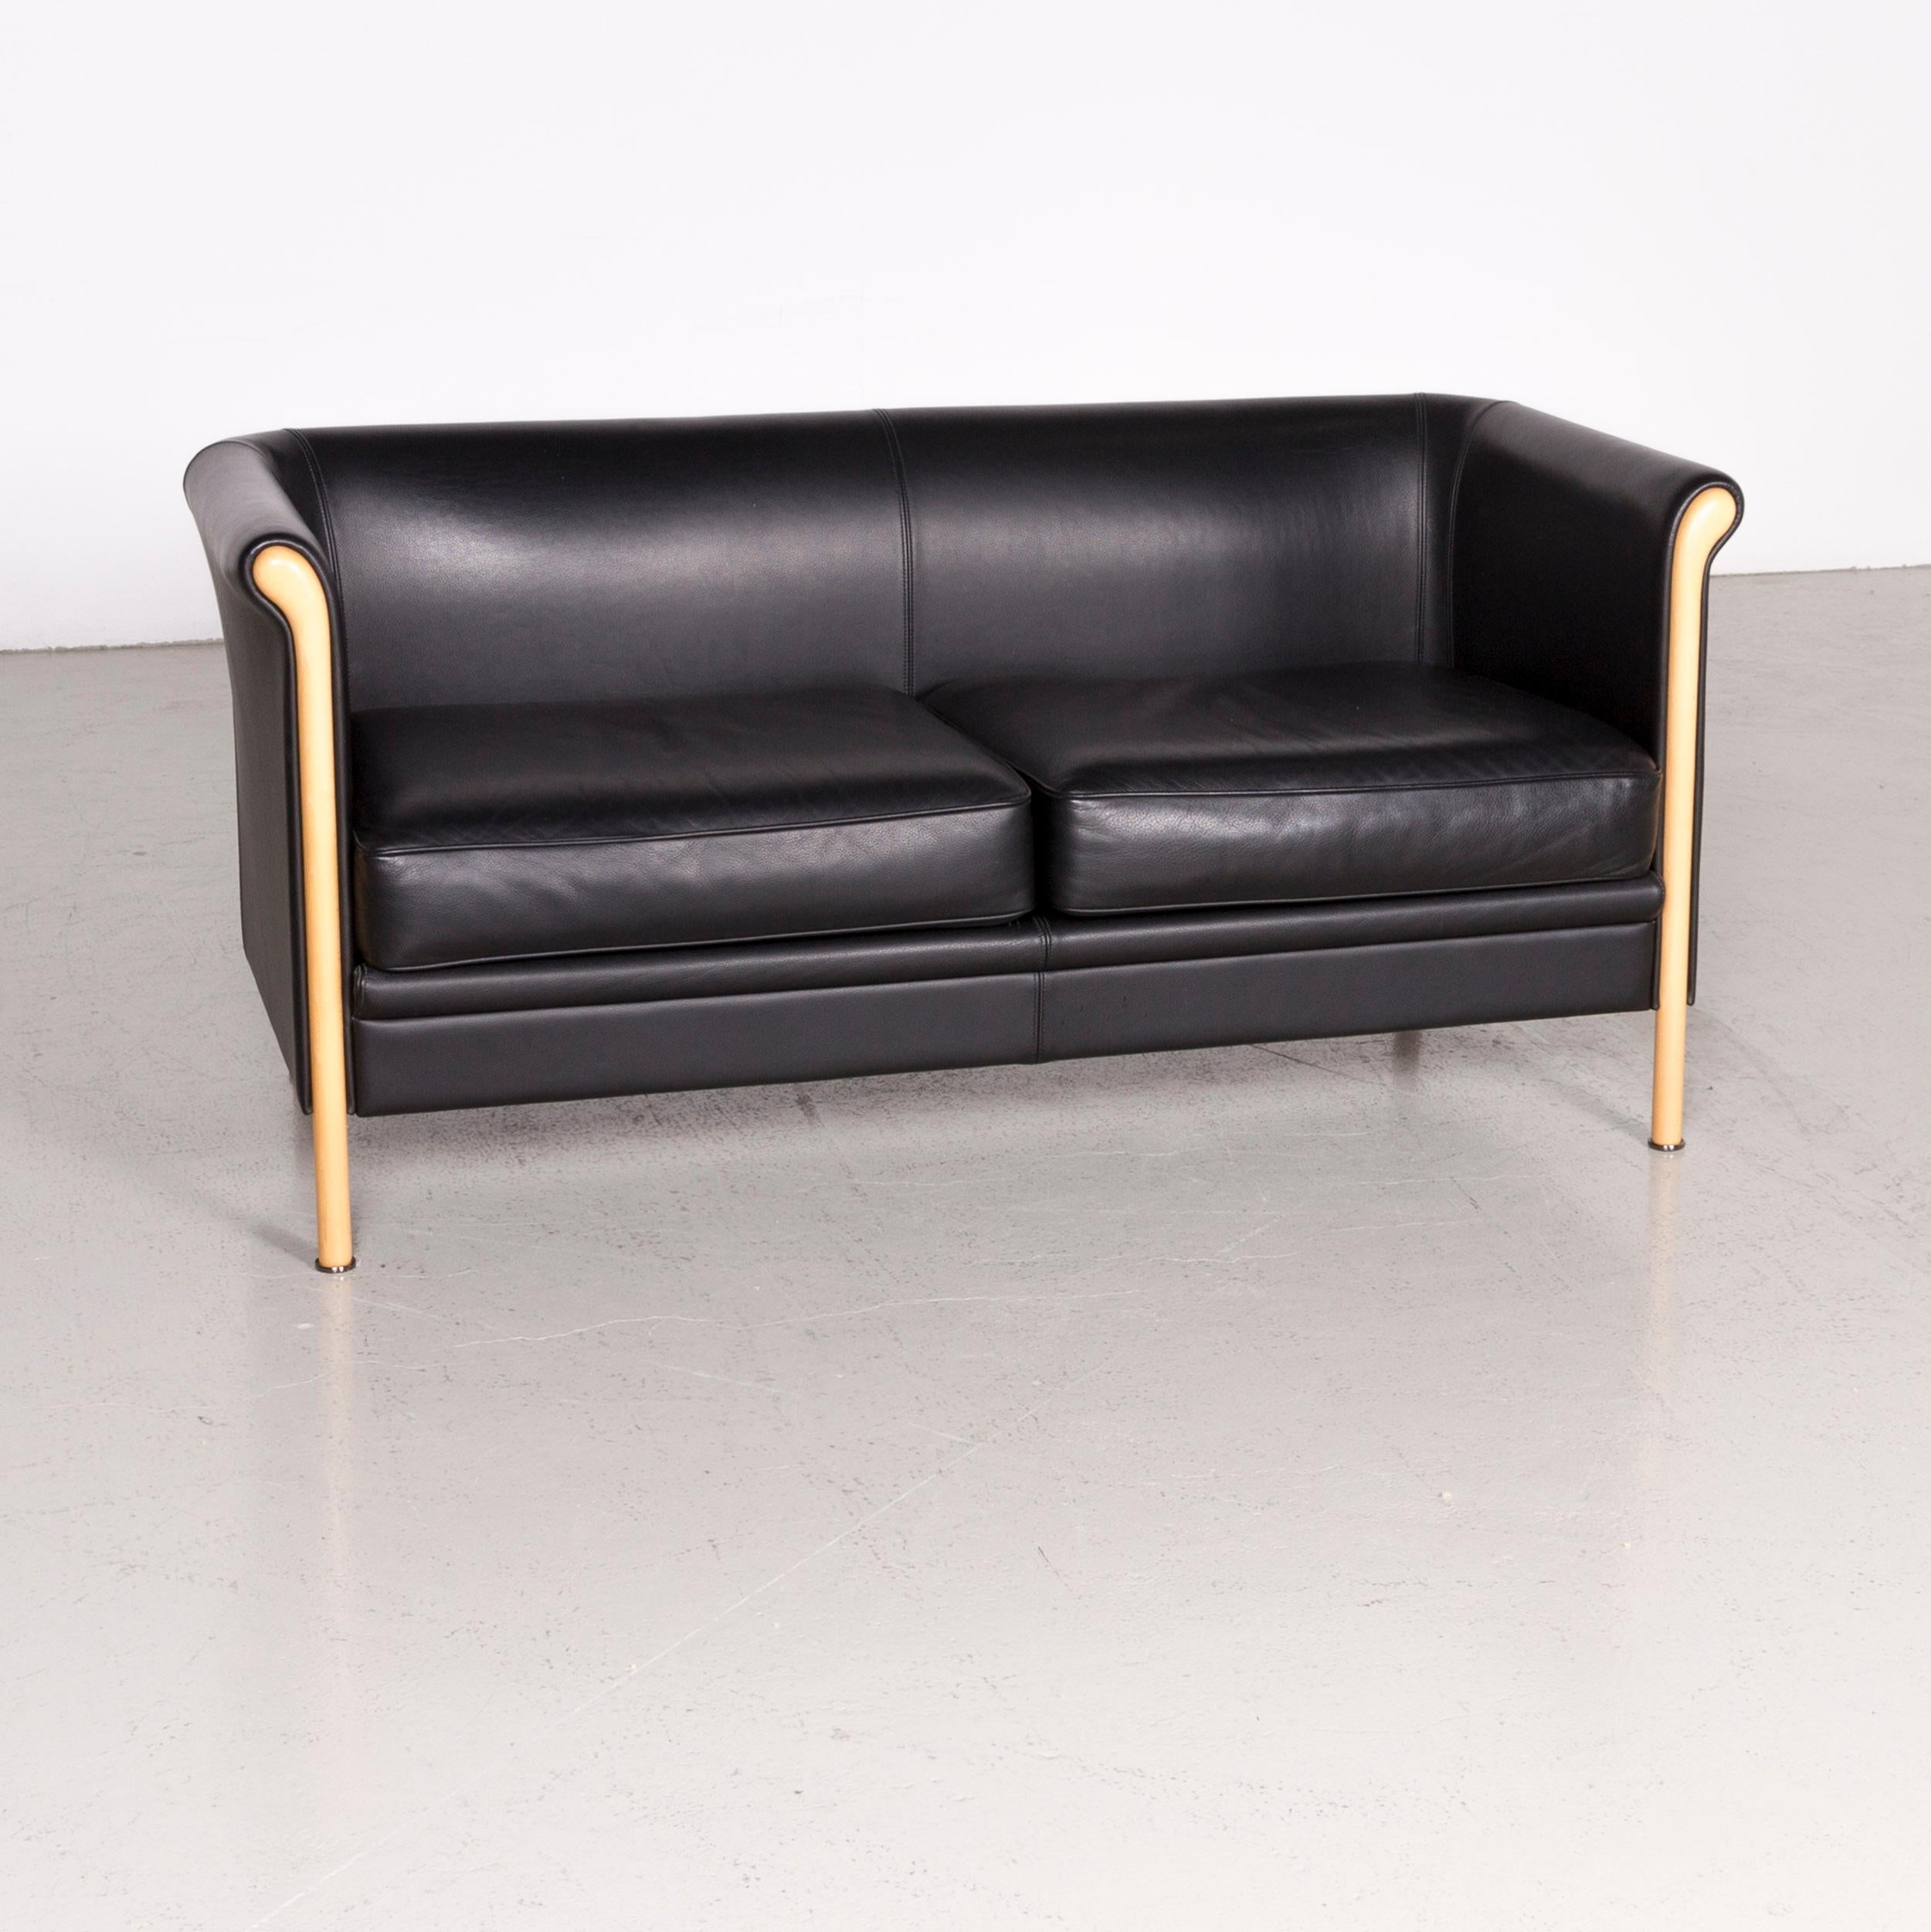 Moroso designer leather sofa in black, two-seat couch.